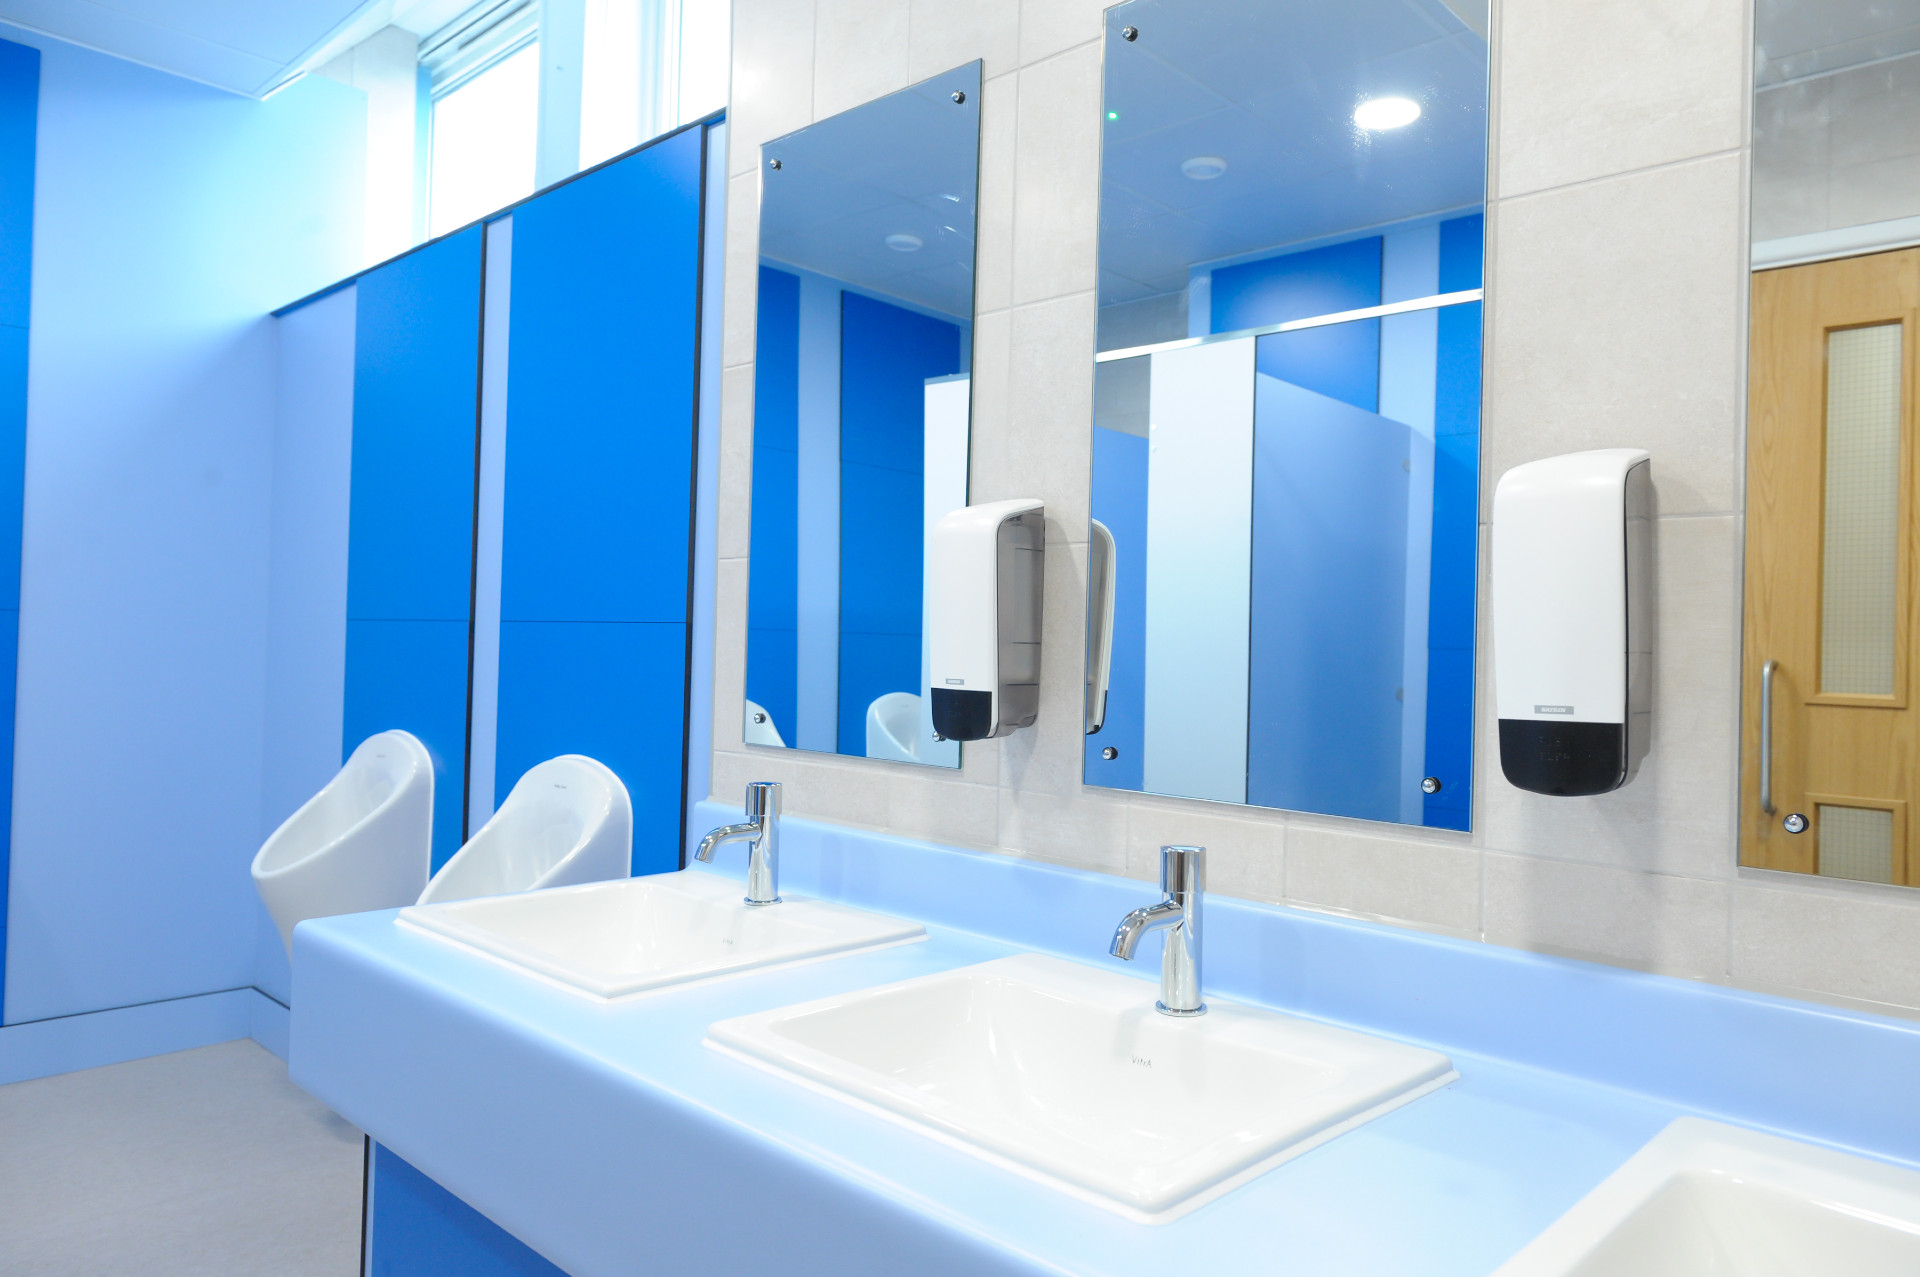 Urinals and sinks in a blue washroom.